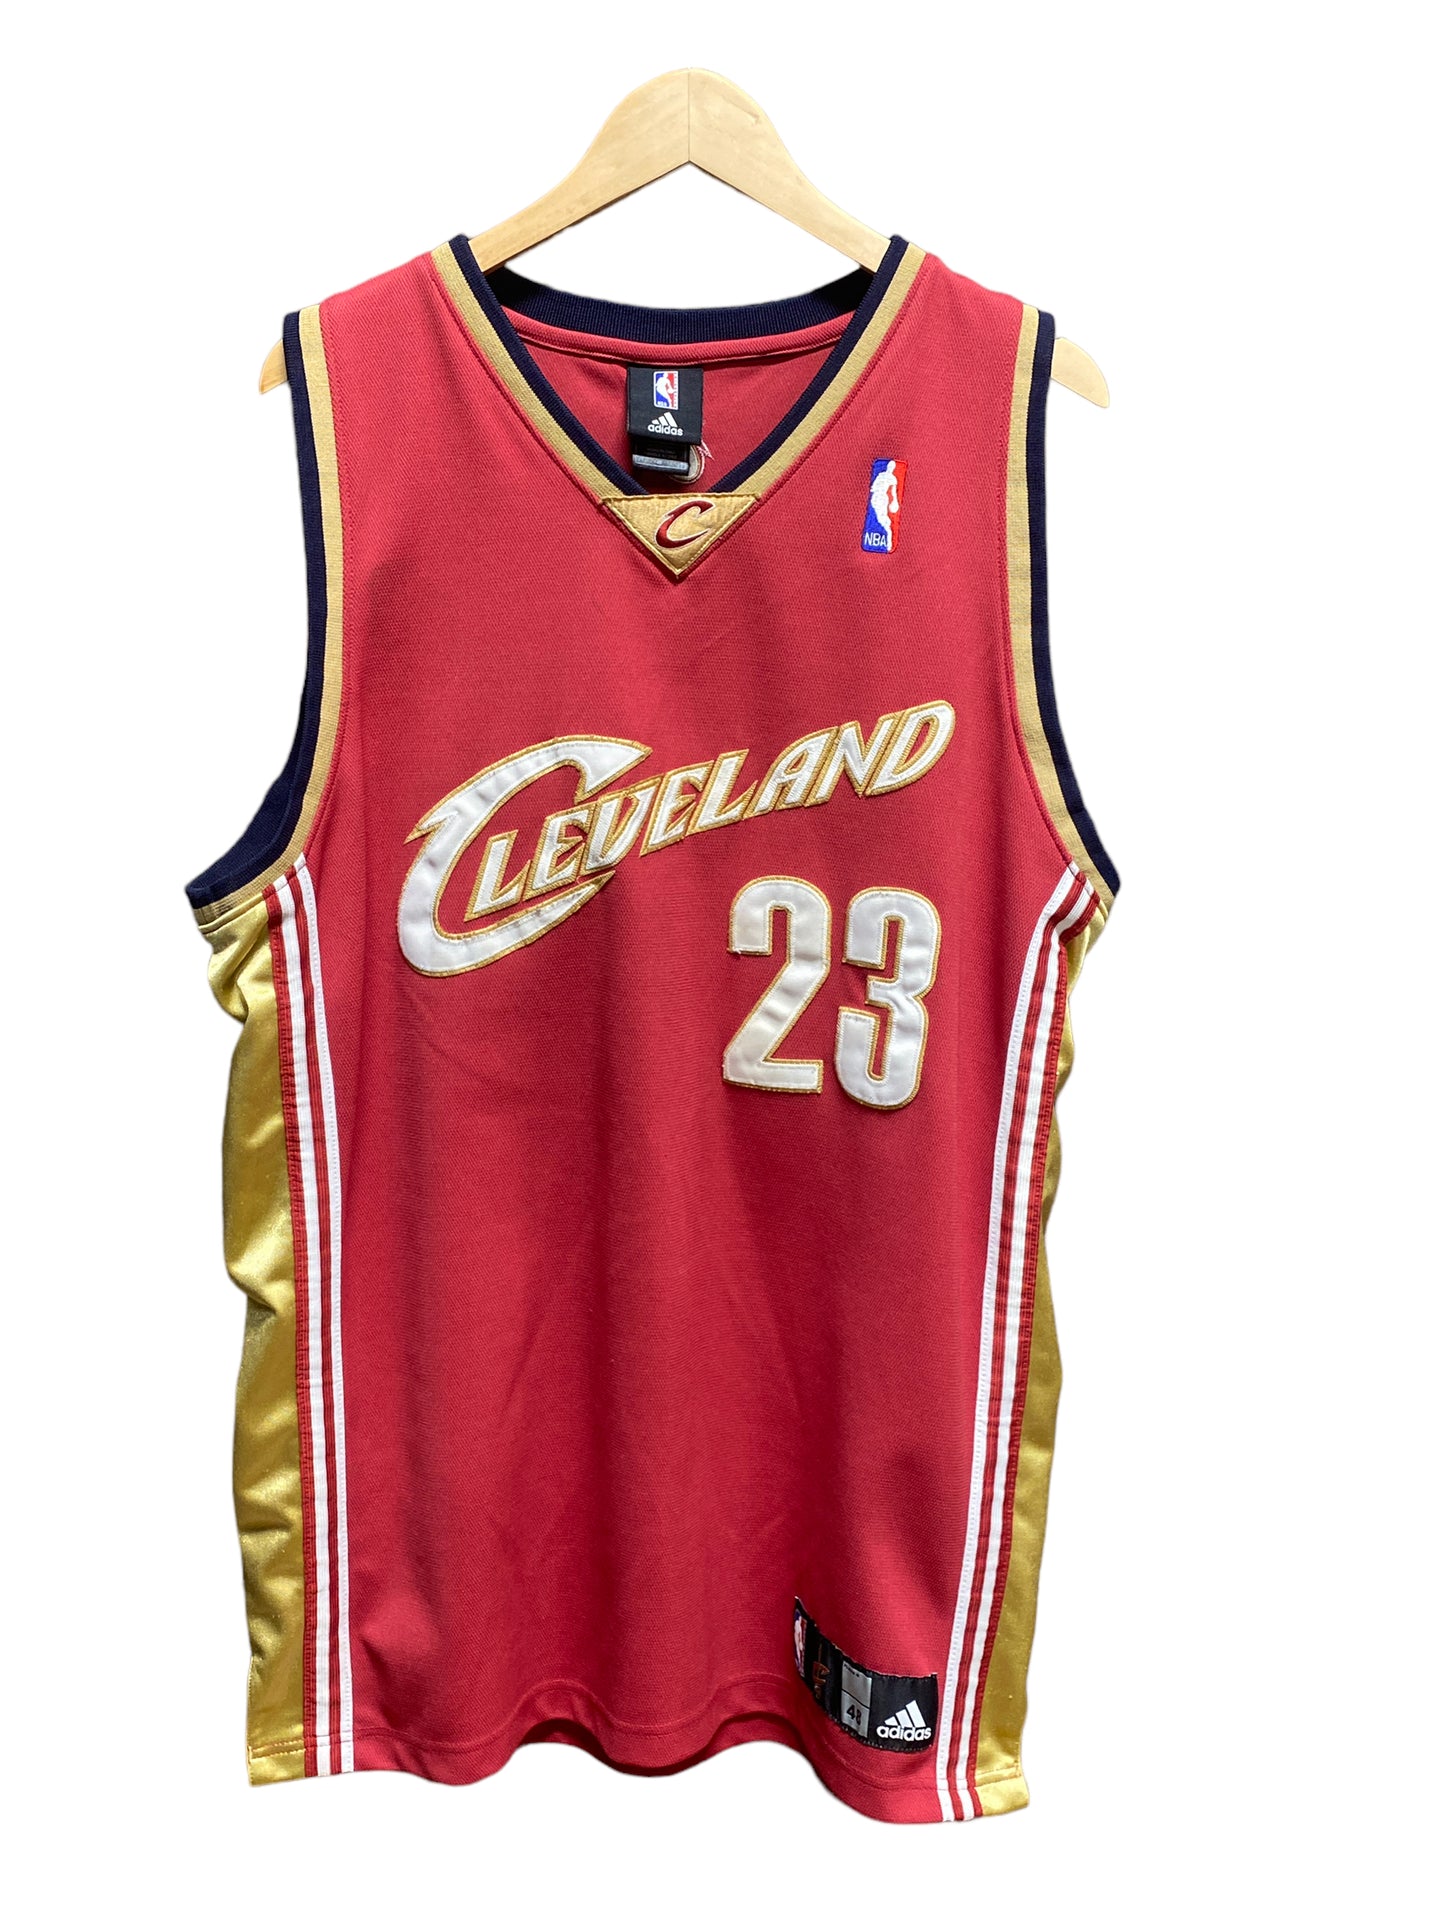 Adidas Cleveland Cavaliers Lebron James Red #23 Jersey Stitched Size 48 (Large)